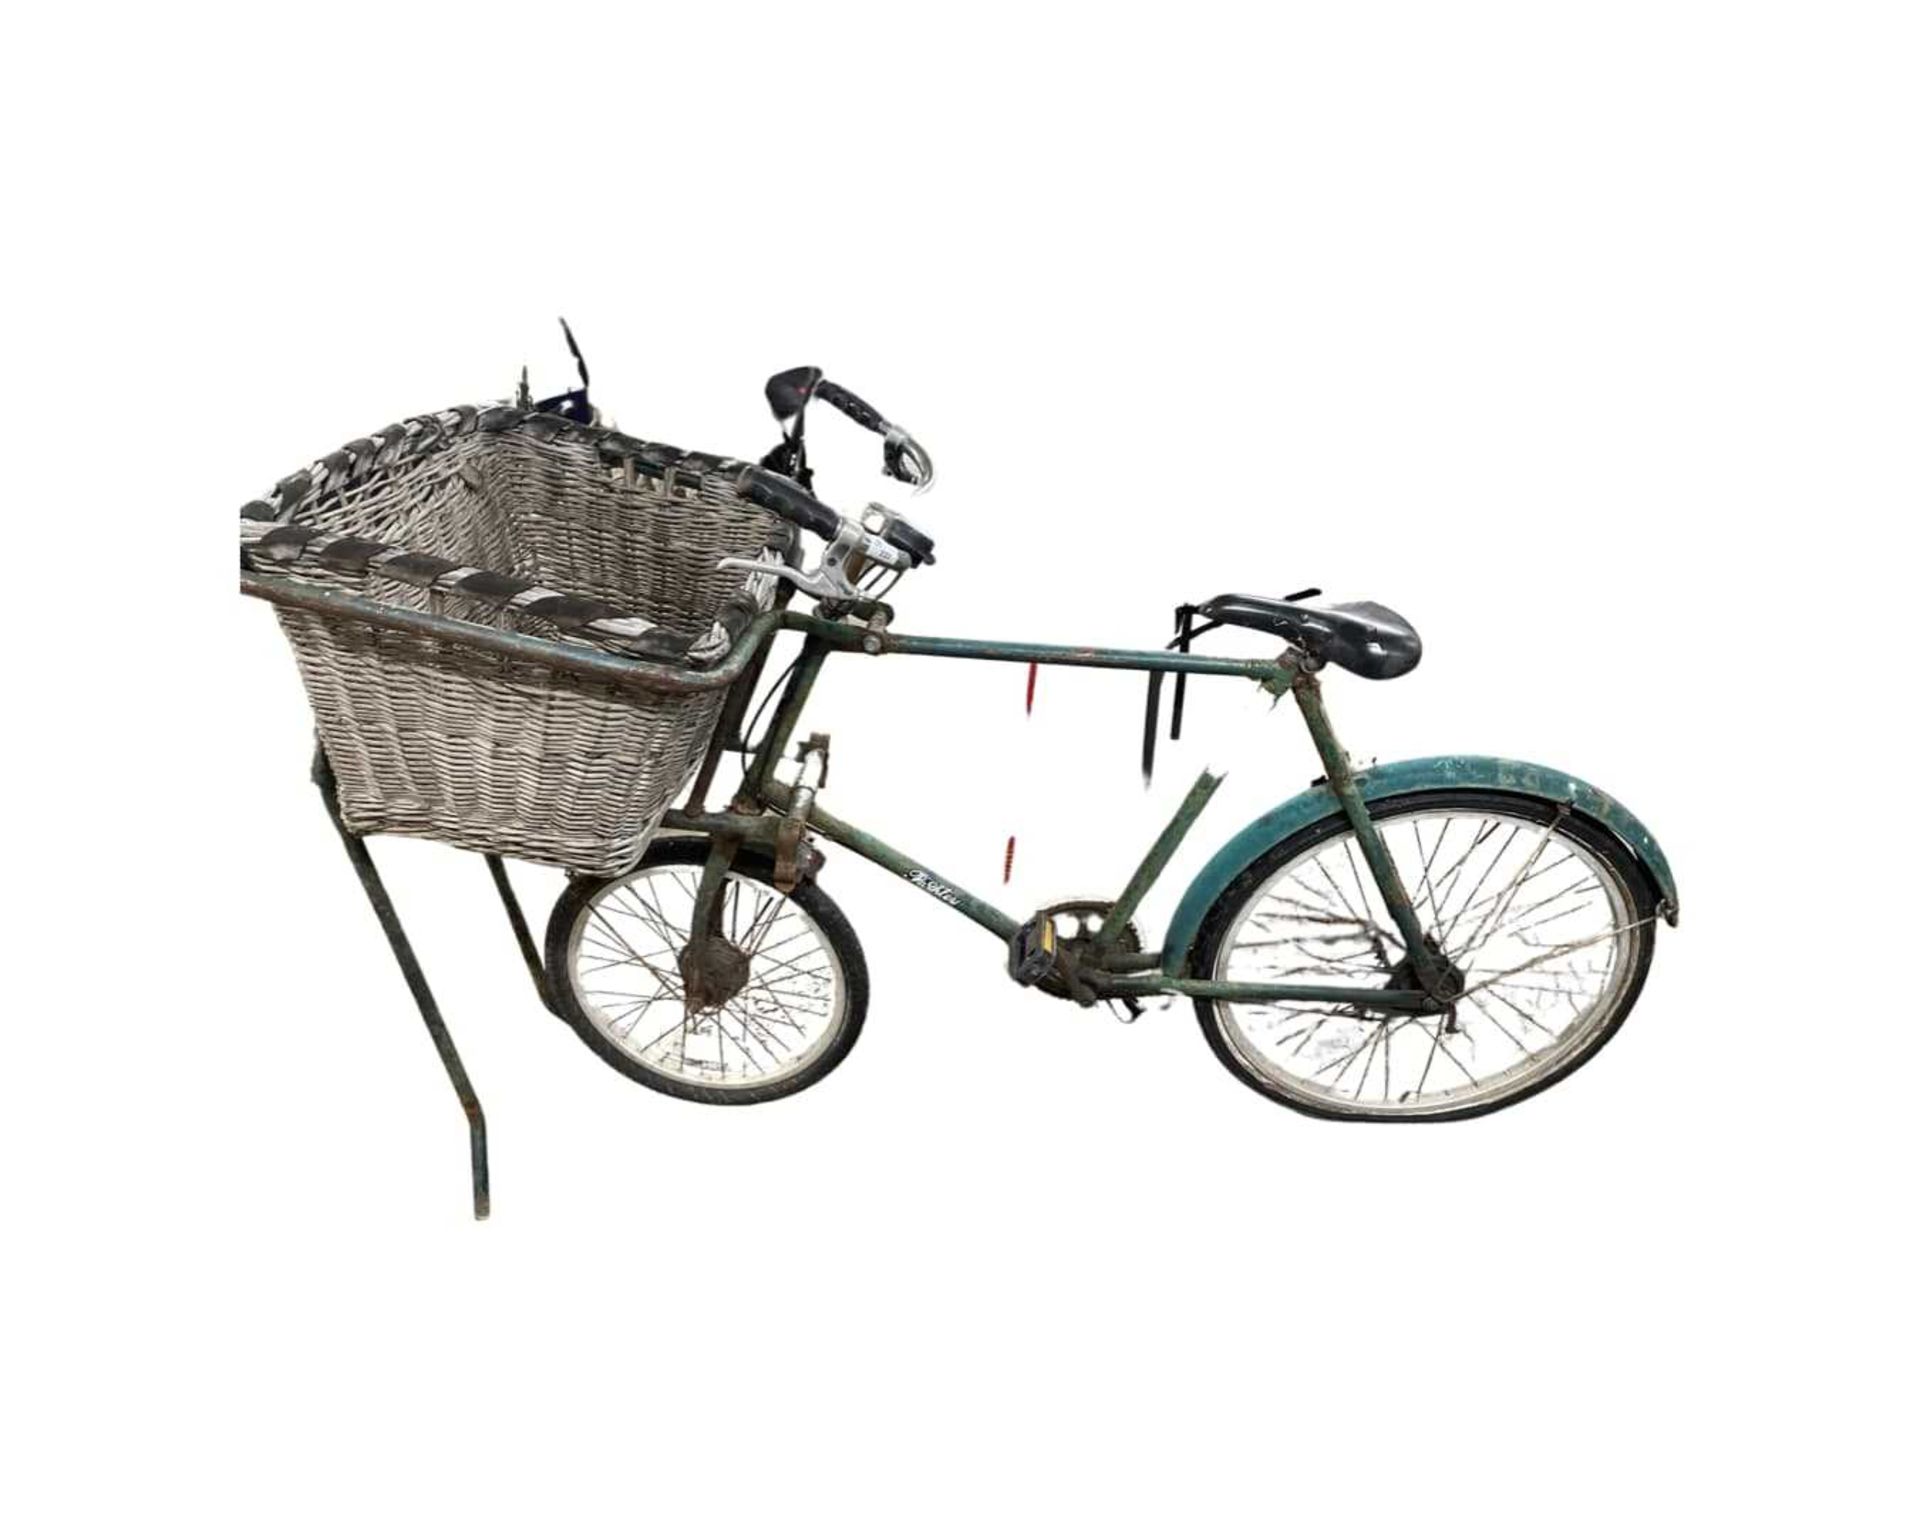 Vintage Pashley Bakers bike with basket and stand